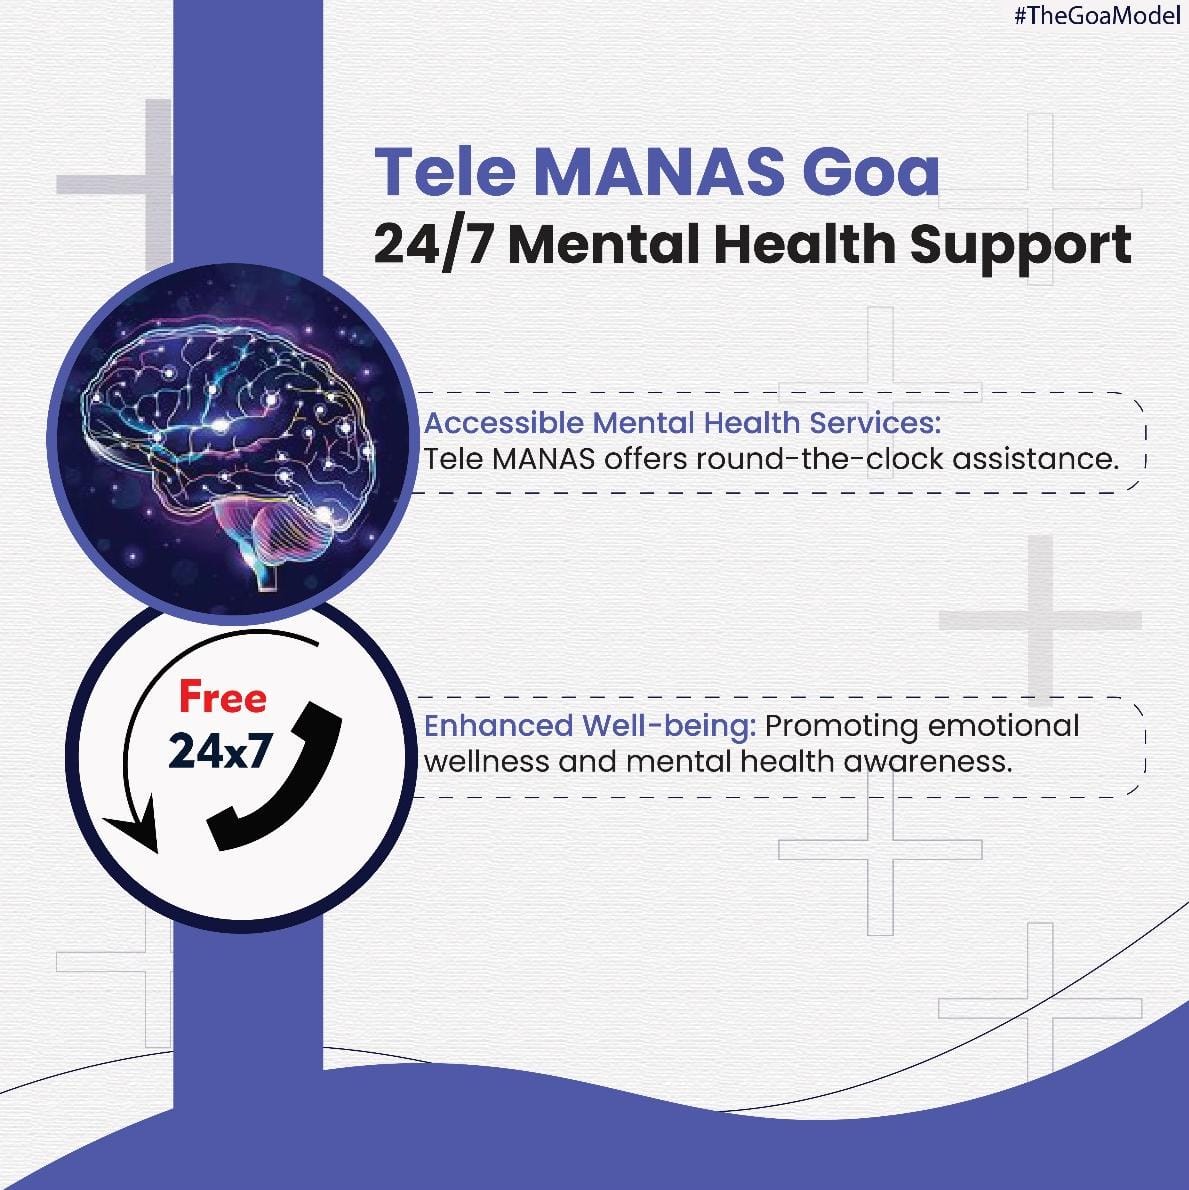 Need mental health support in Goa? Tele MANAS is here with 24/7 assistance, promoting emotional wellness and mental health awareness. #TeleMANASGoa #MentalHealthSupport
#TheGoaModel
#TeleMANASGoa #MentalHealthSupport #EmotionalWellness #MentalHealthAwareness